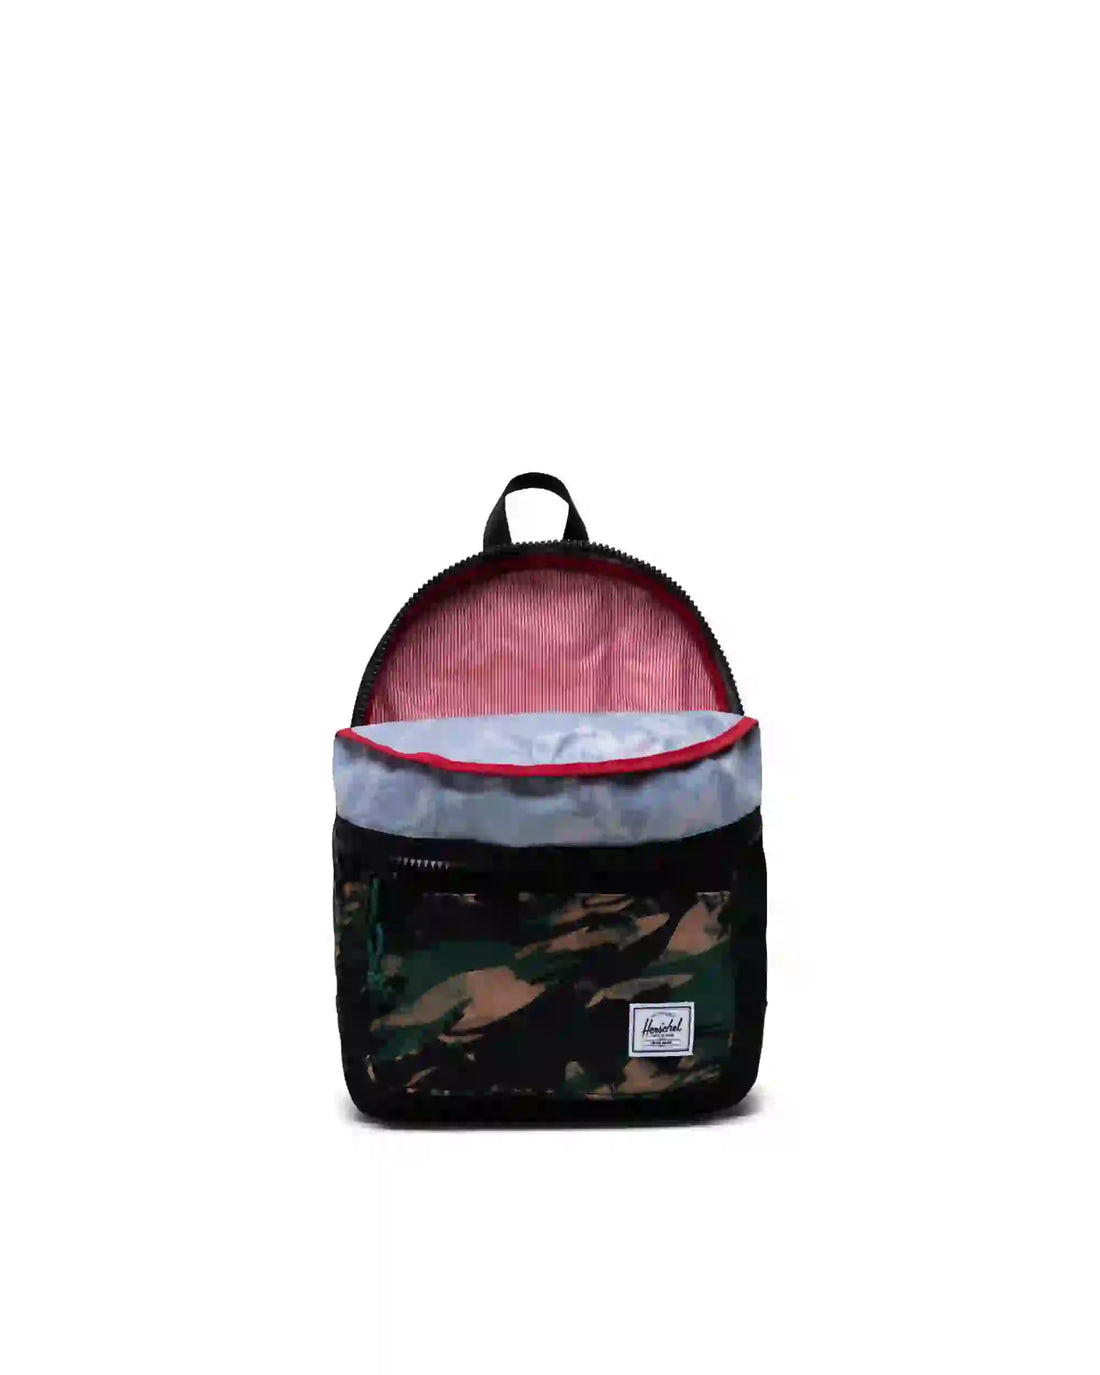 Heritage Backpack | Kids - Cloud Forest Camo